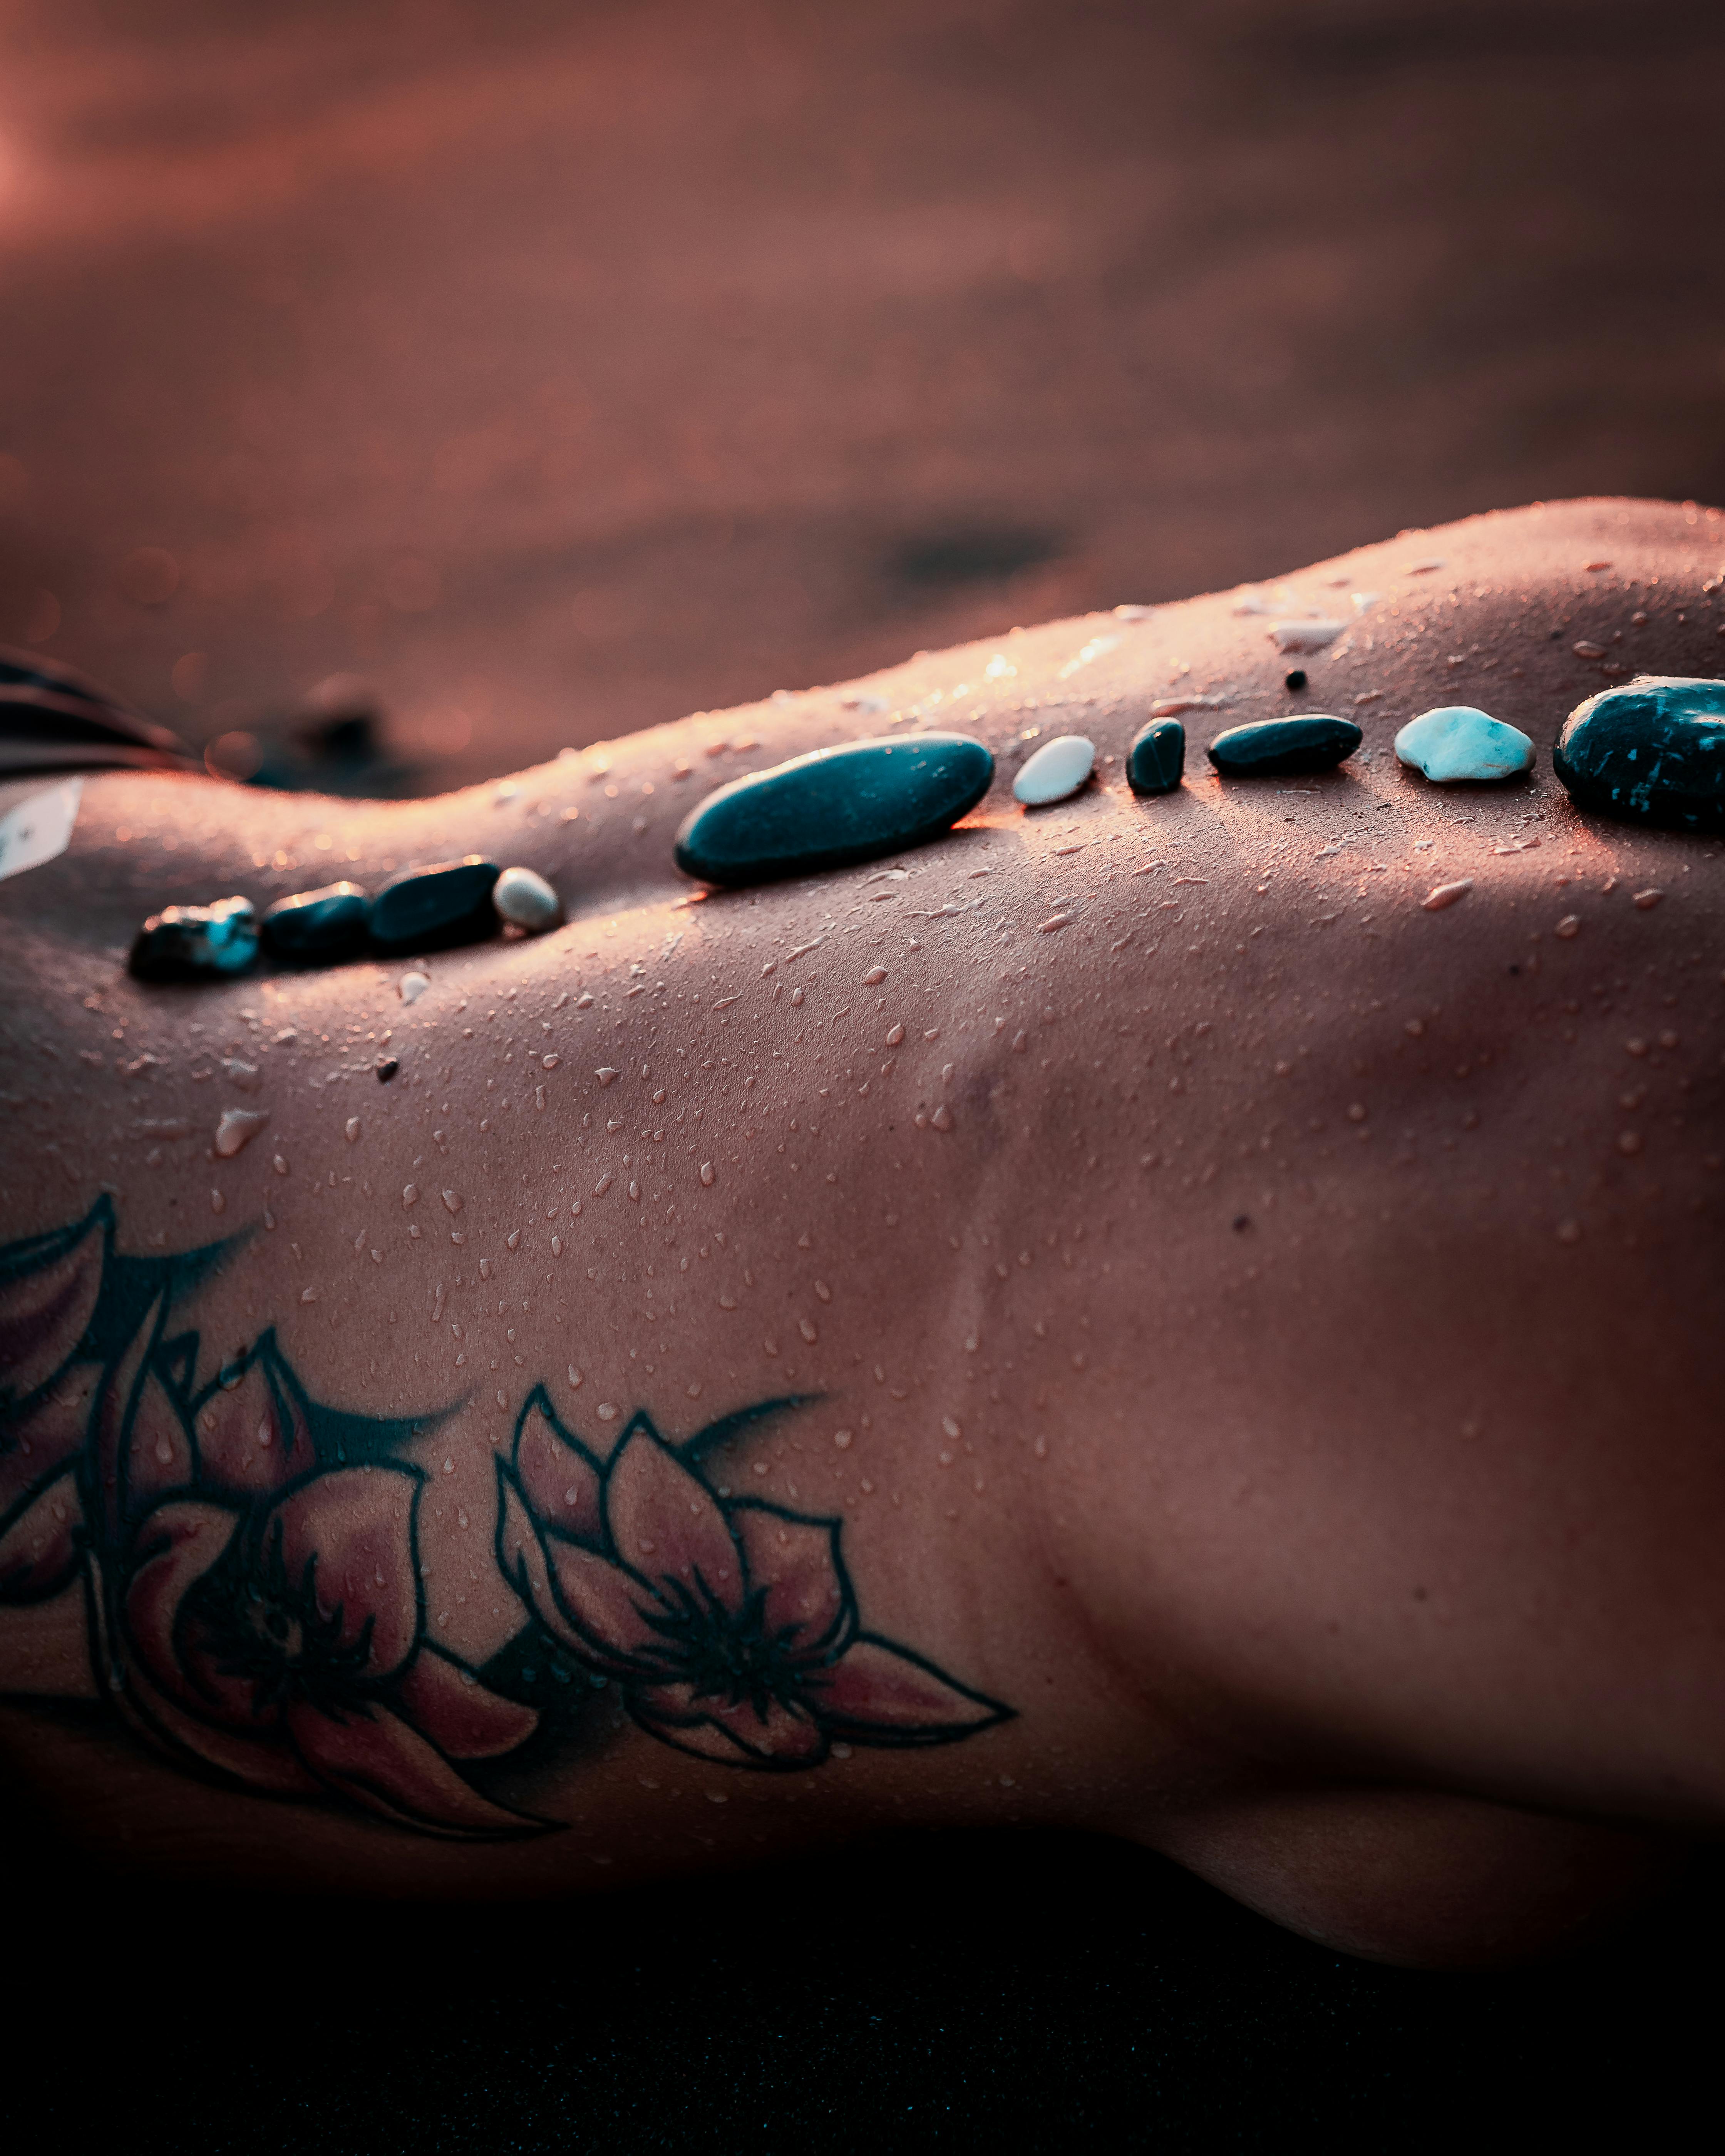 Micro-realistic water drop tattoo on the forearm